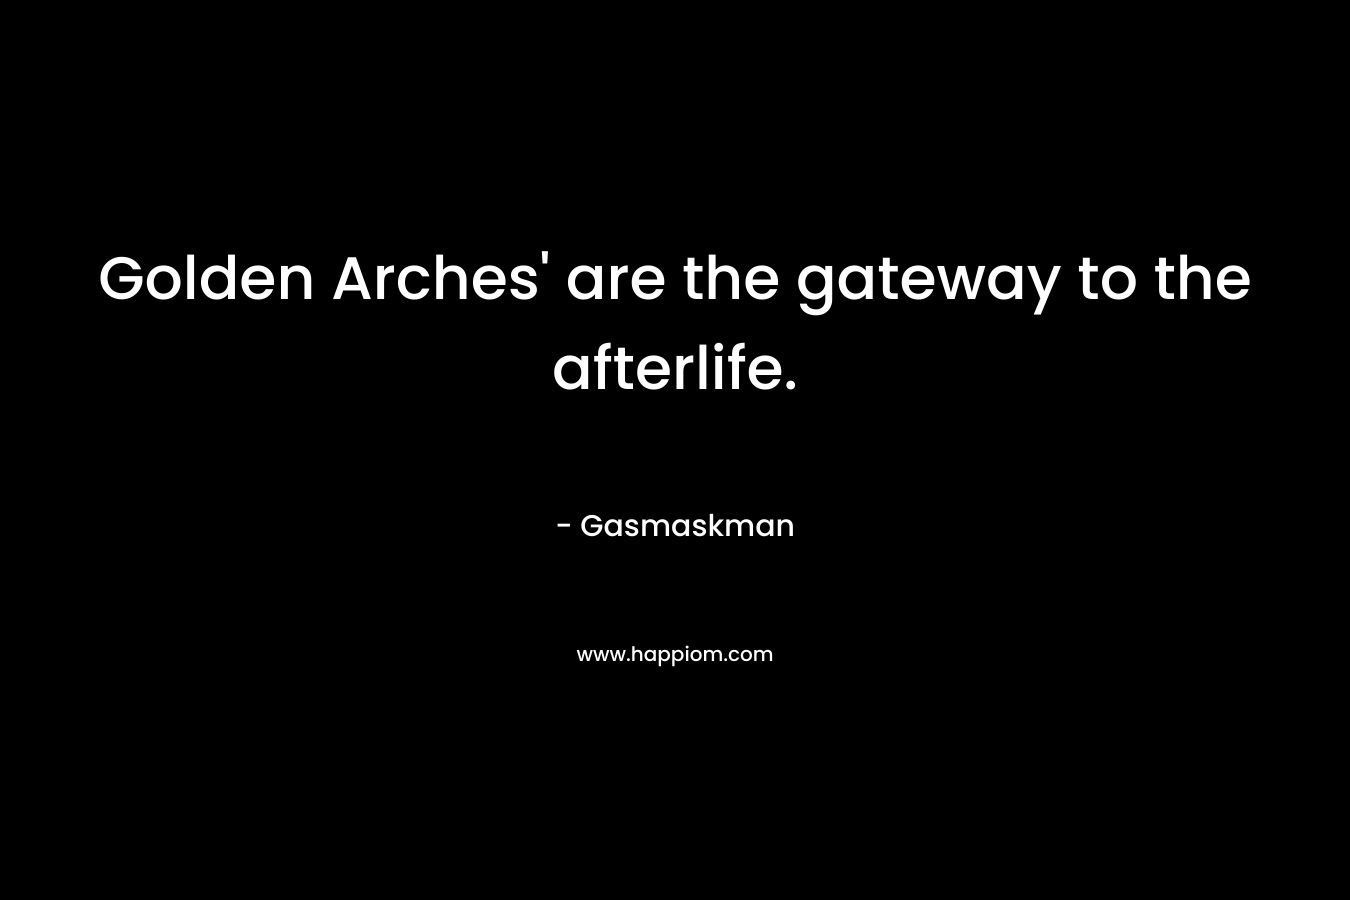 Golden Arches’ are the gateway to the afterlife. – Gasmaskman